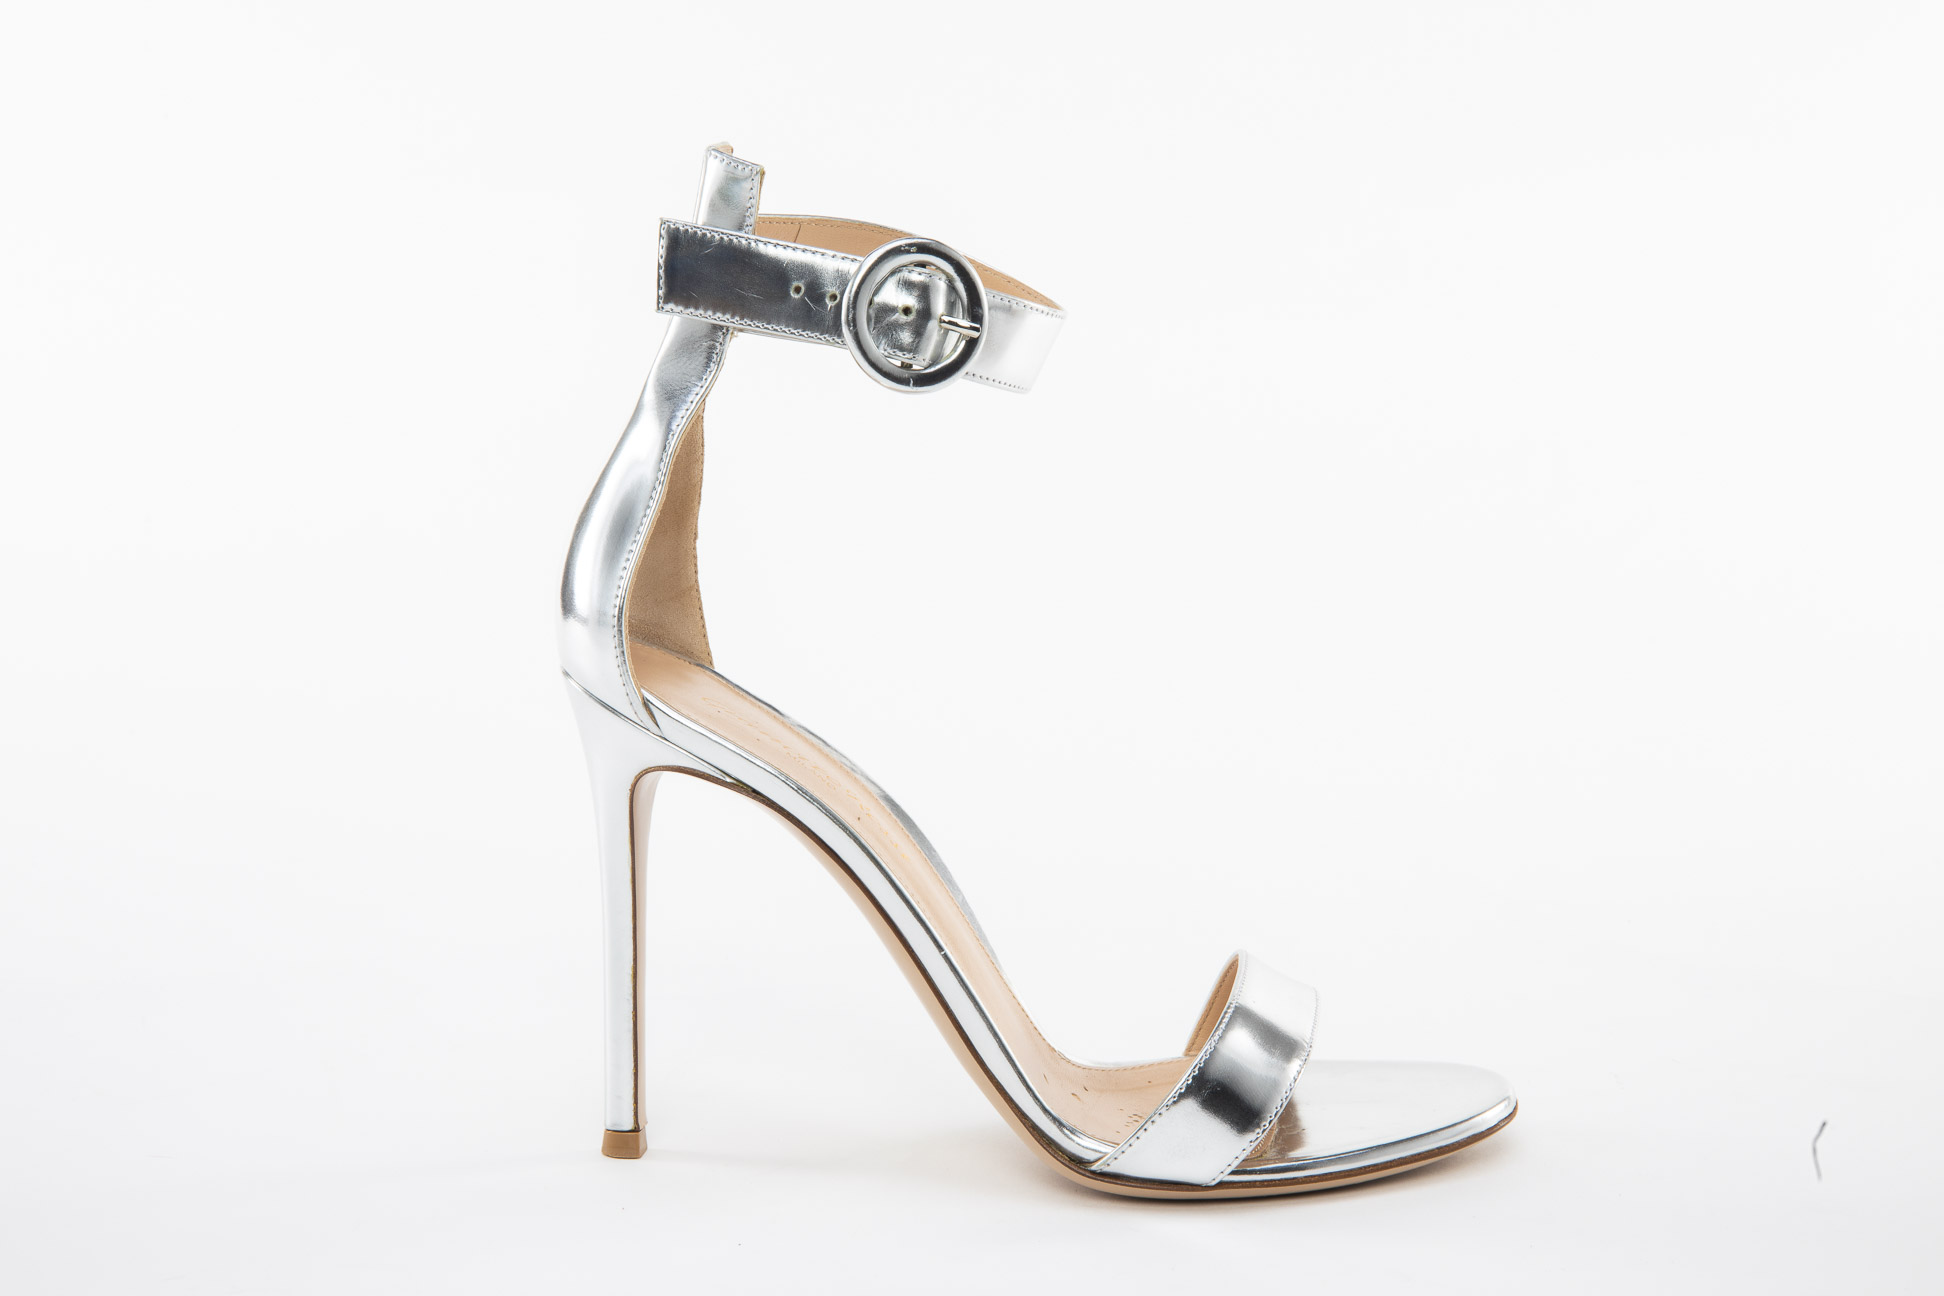 A PAIR OF GIANVITO ROSSI SILVER LEATHER STRAPPY HEELS EU 38 - Image 2 of 4